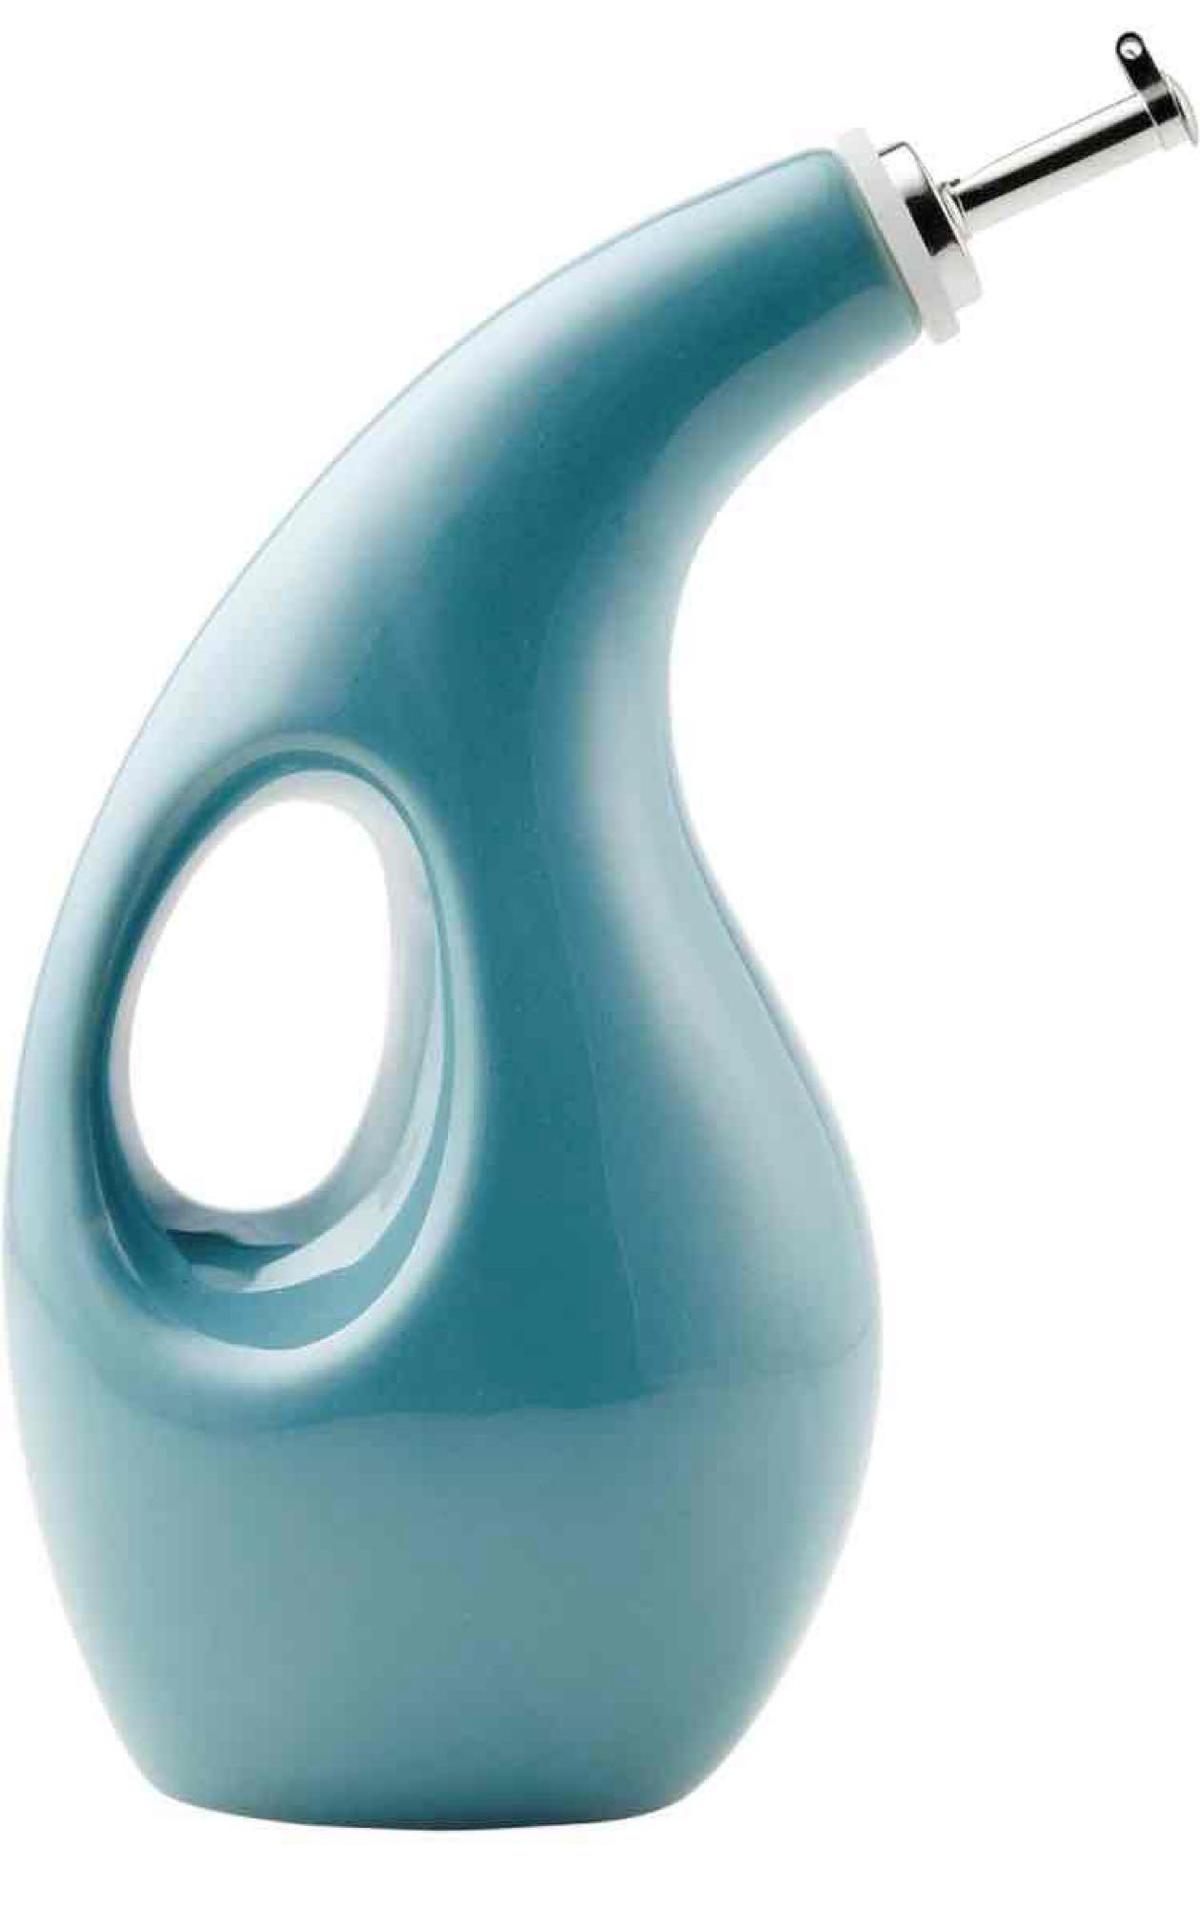 Rachael Ray 48467 Ceramic EVOO Oil and Vinegar Dispensing Bottle with Spout, 24 Ounce - Agave Blue